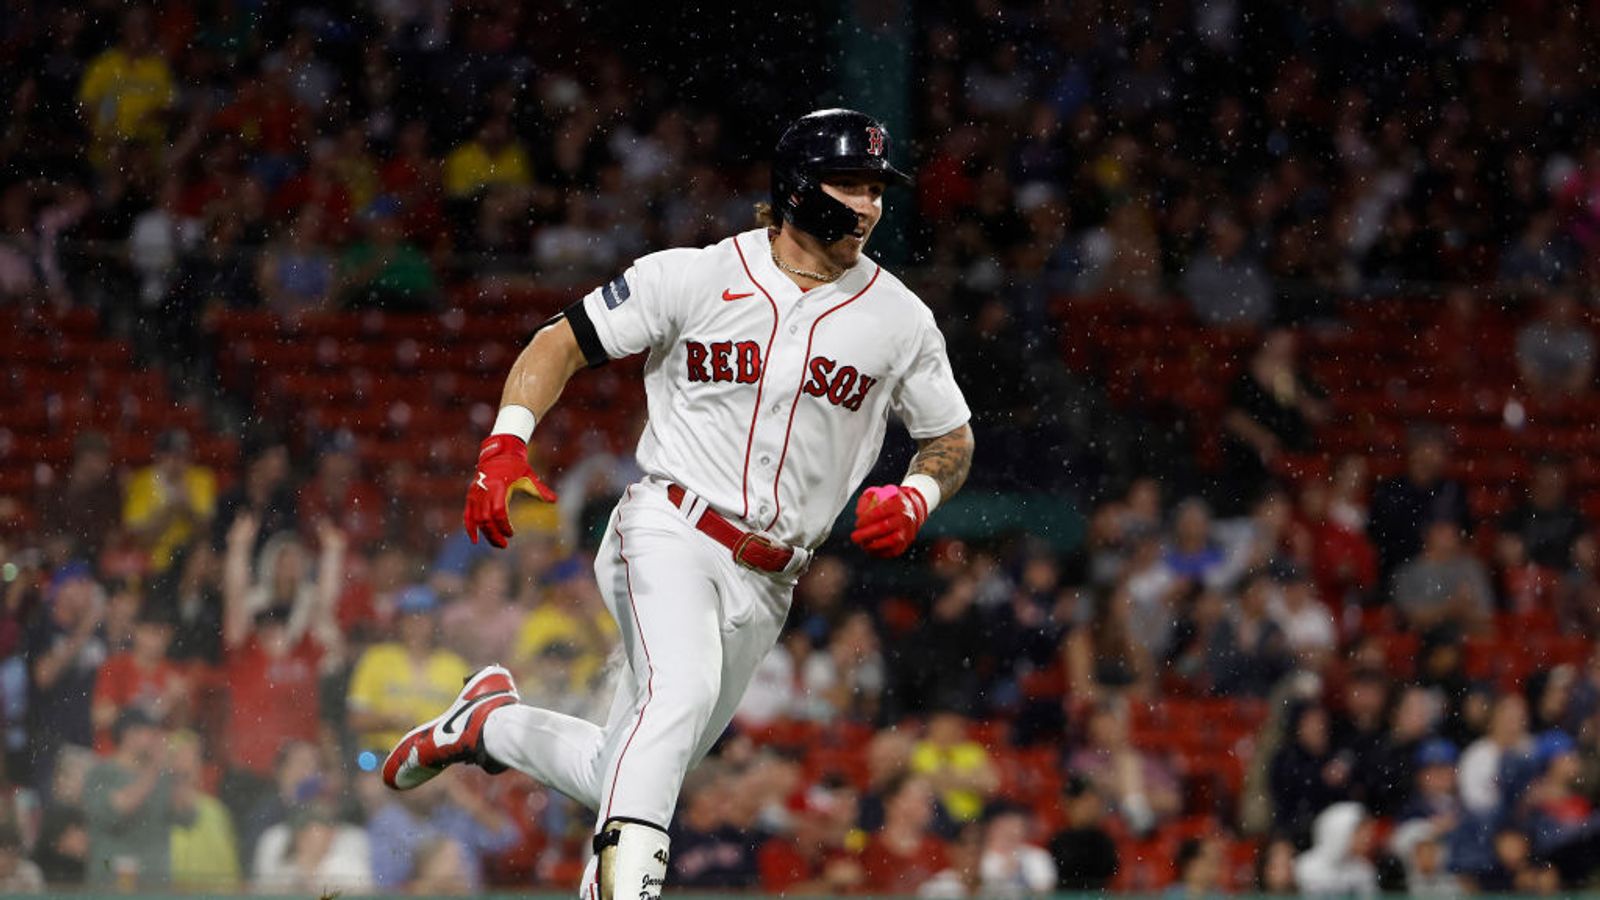 BSJ Live Coverage: Rangers (50-35) at Red Sox (43-42), 1:35 p.m.